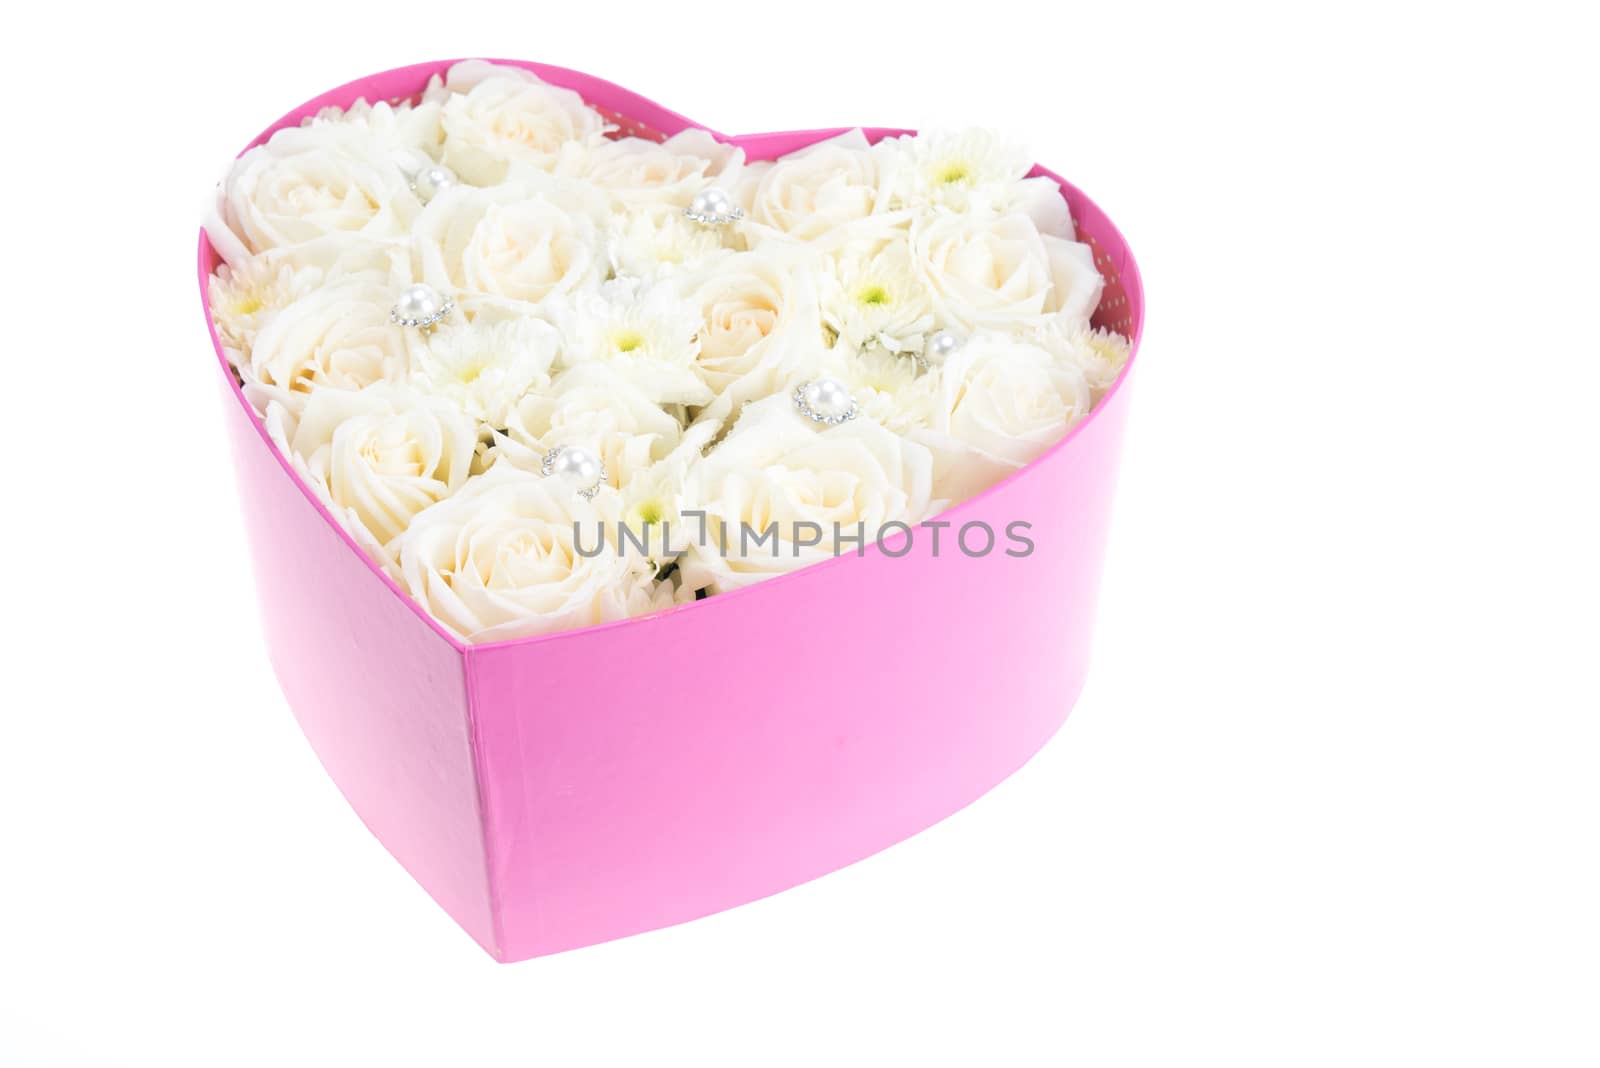 White roses and pearl and diamond held in the heart shape box by iamway